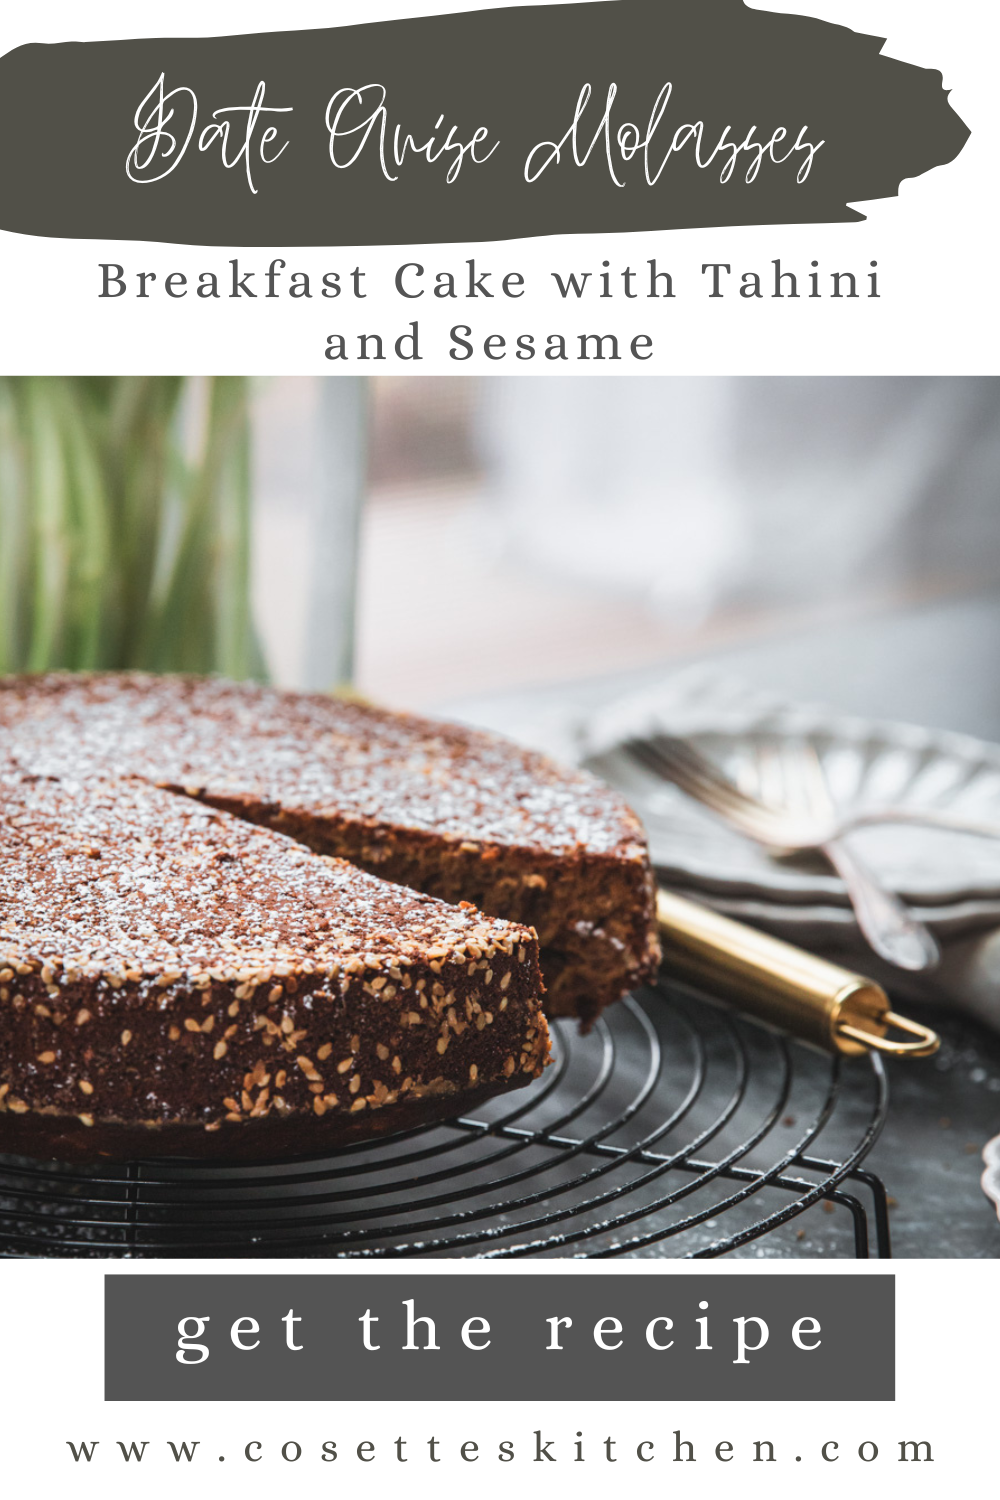 date-anise-molasses-breakfast-cake-with-tahini-and-sesame